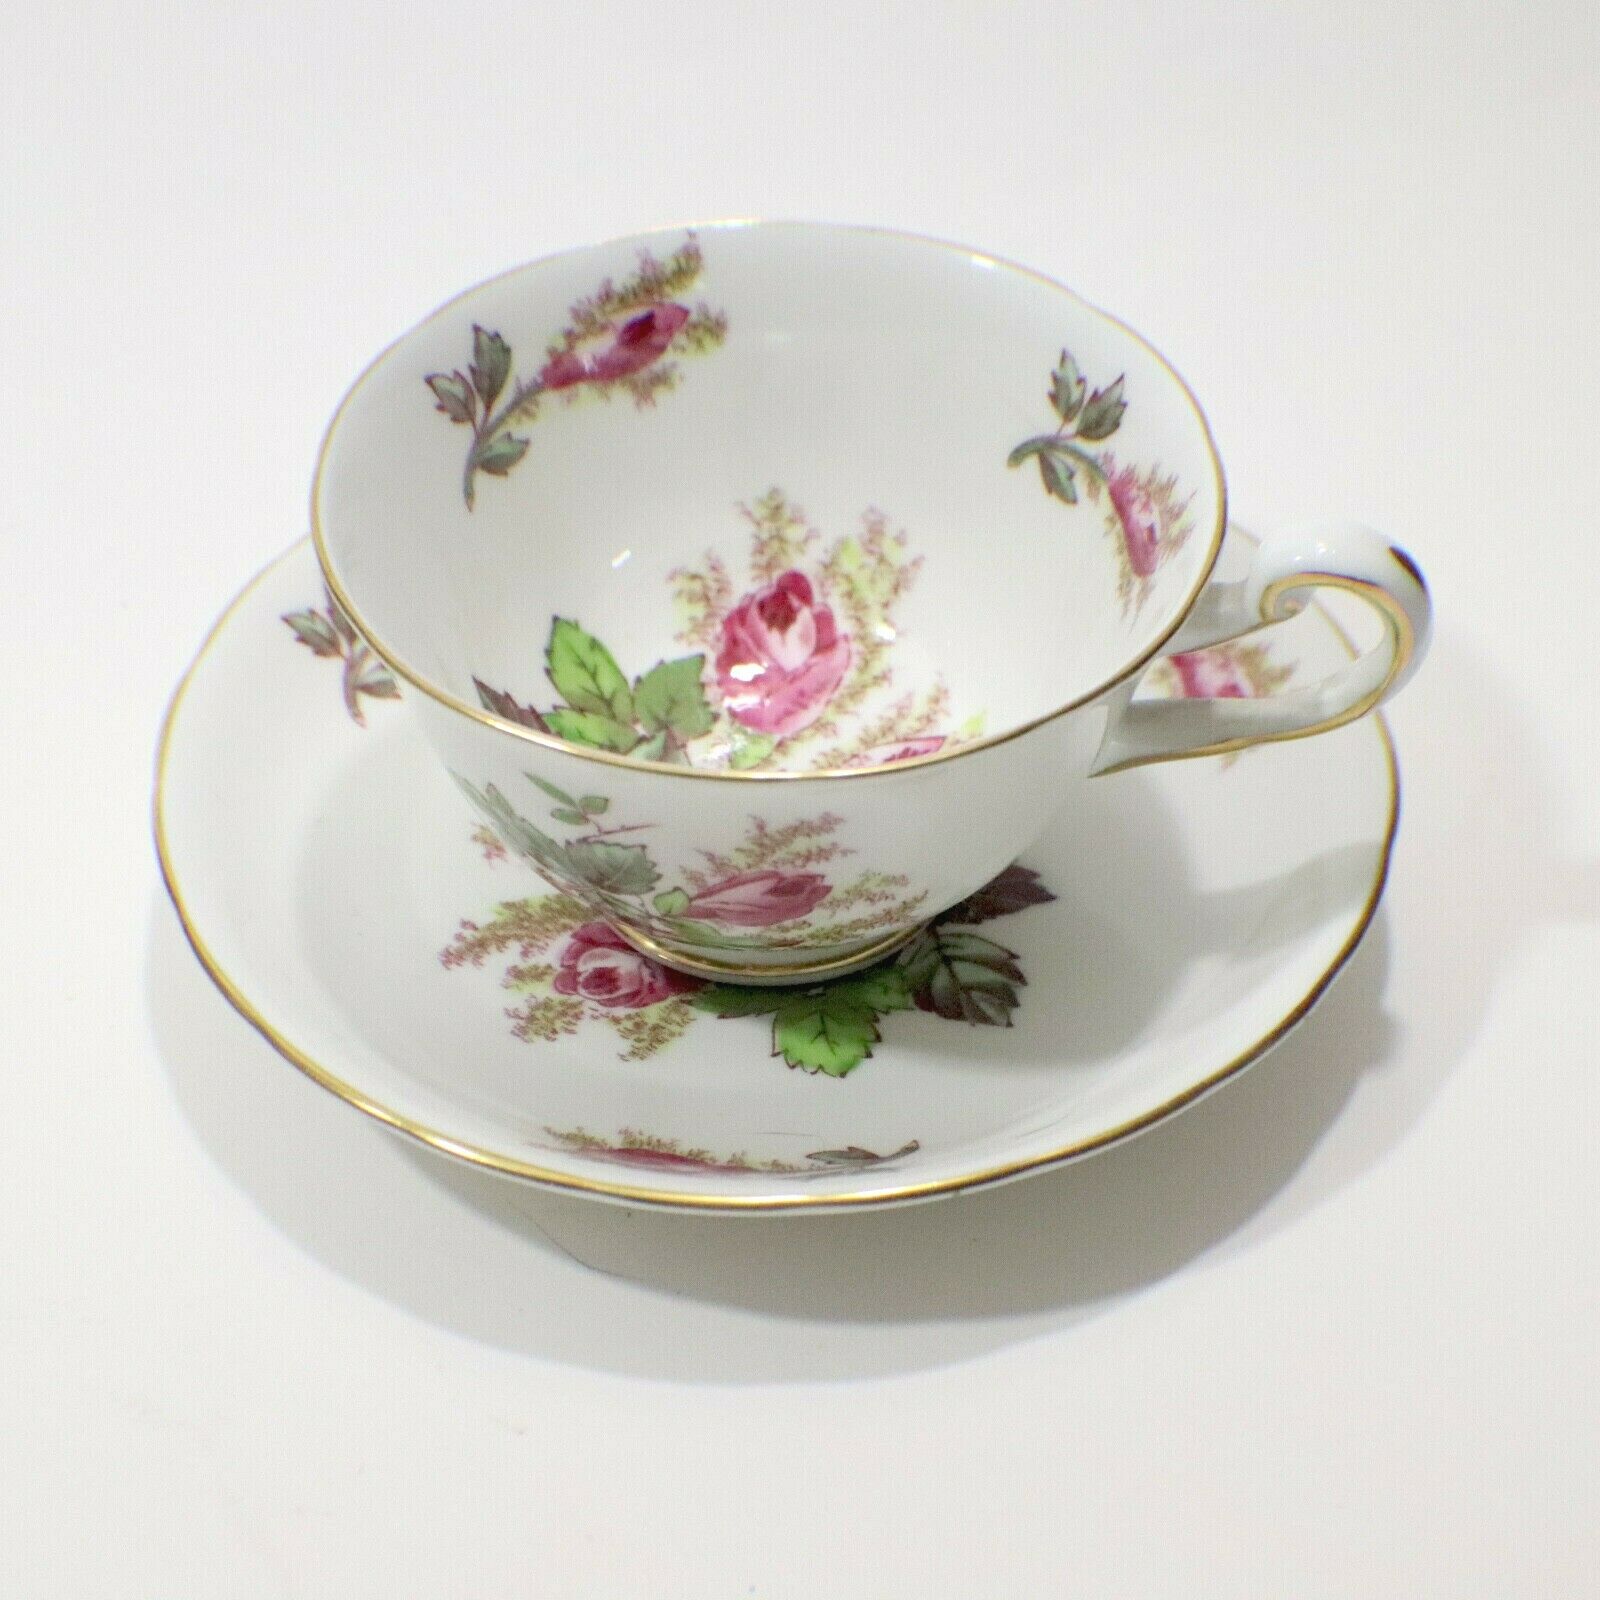 Vintage Bone China Royal Chelsea Tea Cup And Saucer Moss Rose England 1943-1961